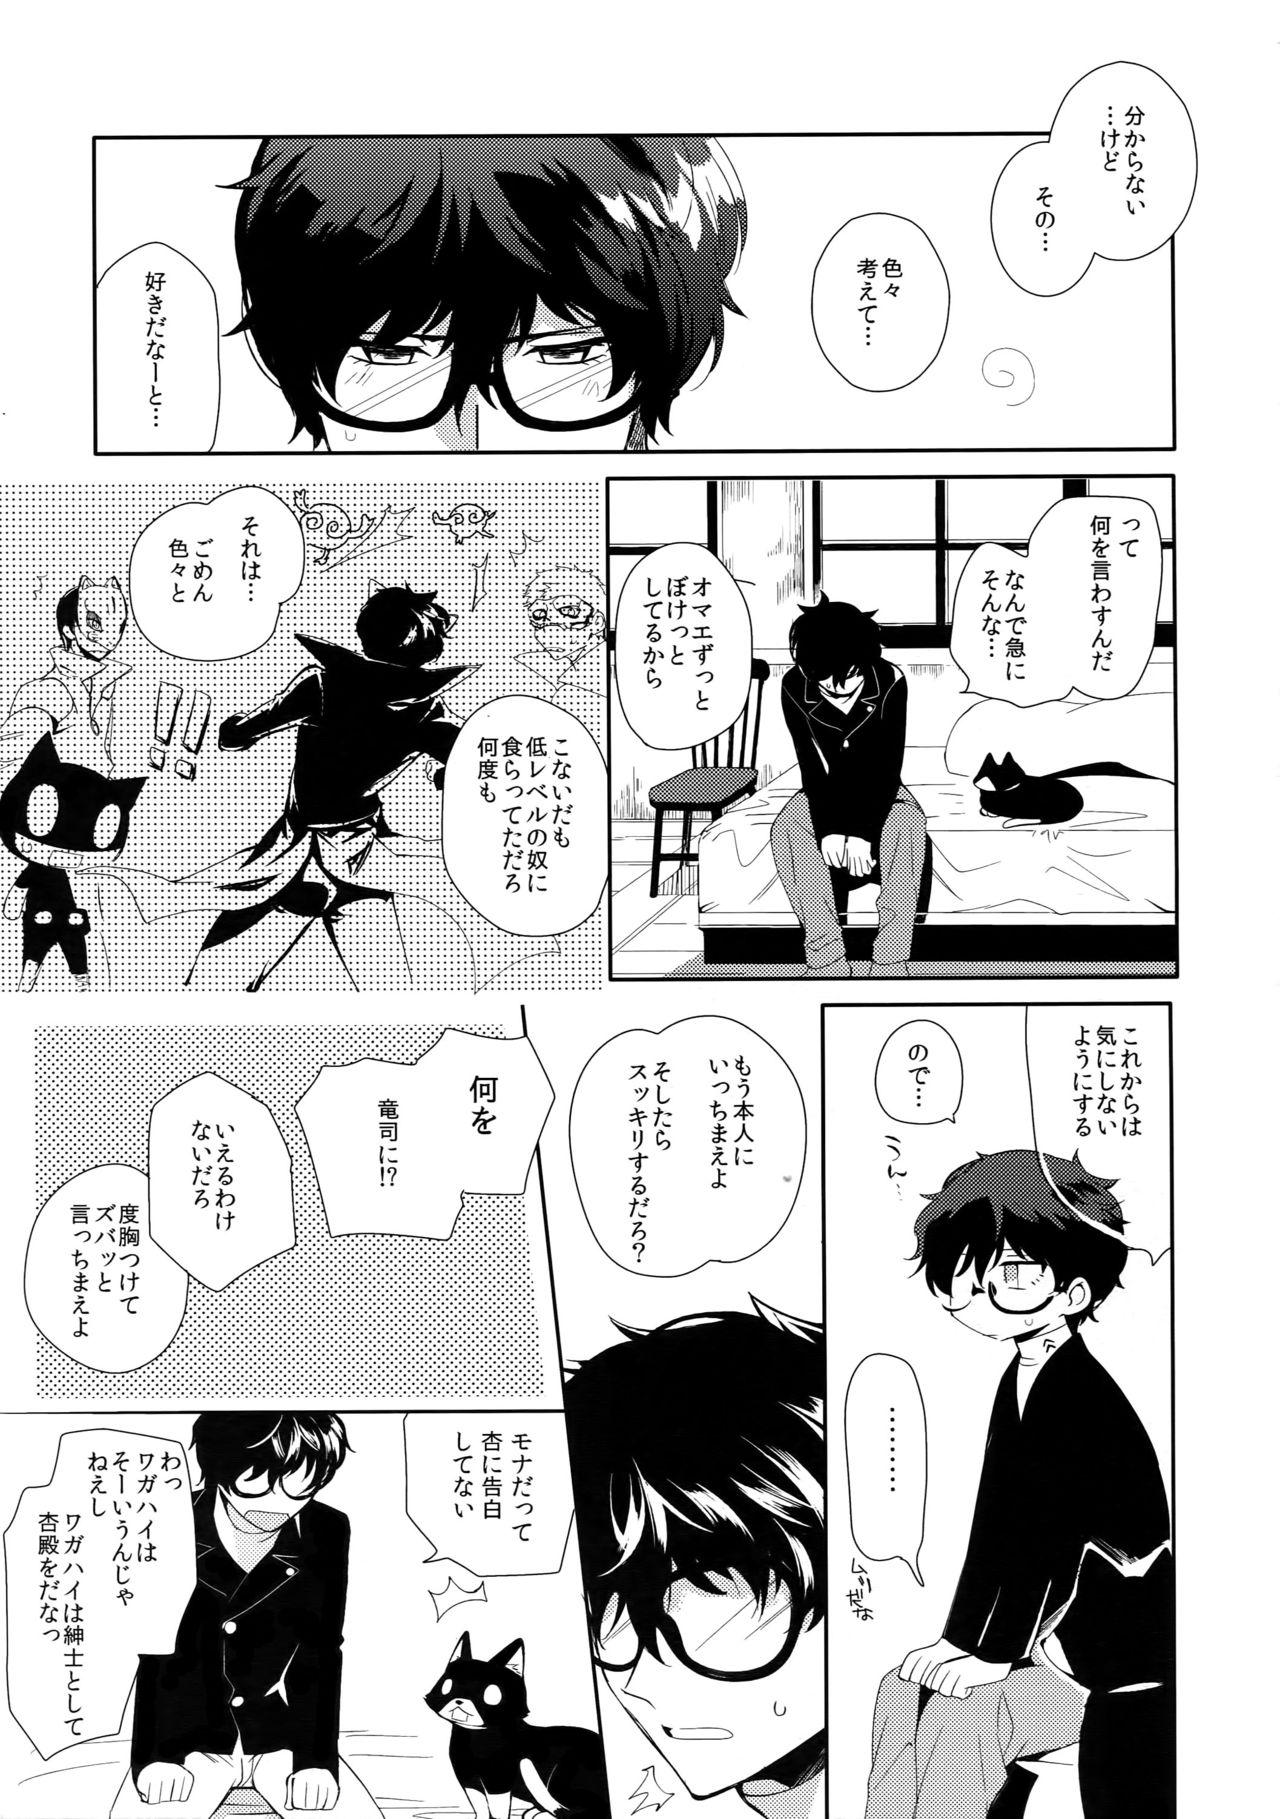 Hot Naked Girl You're My Hero - Persona 5 Girl Girl - Page 6